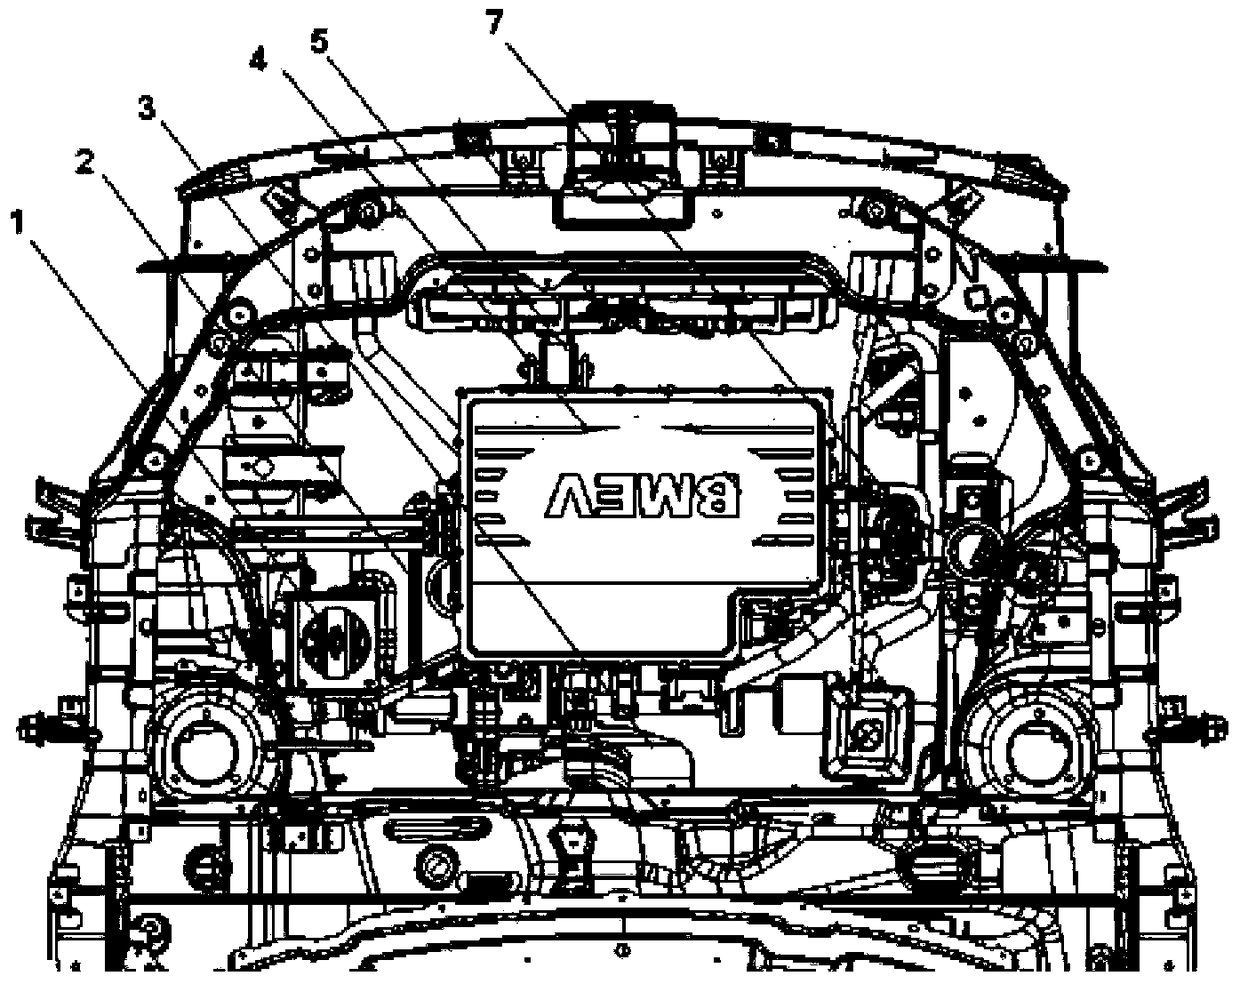 A powertrain layout form of an electric vehicle